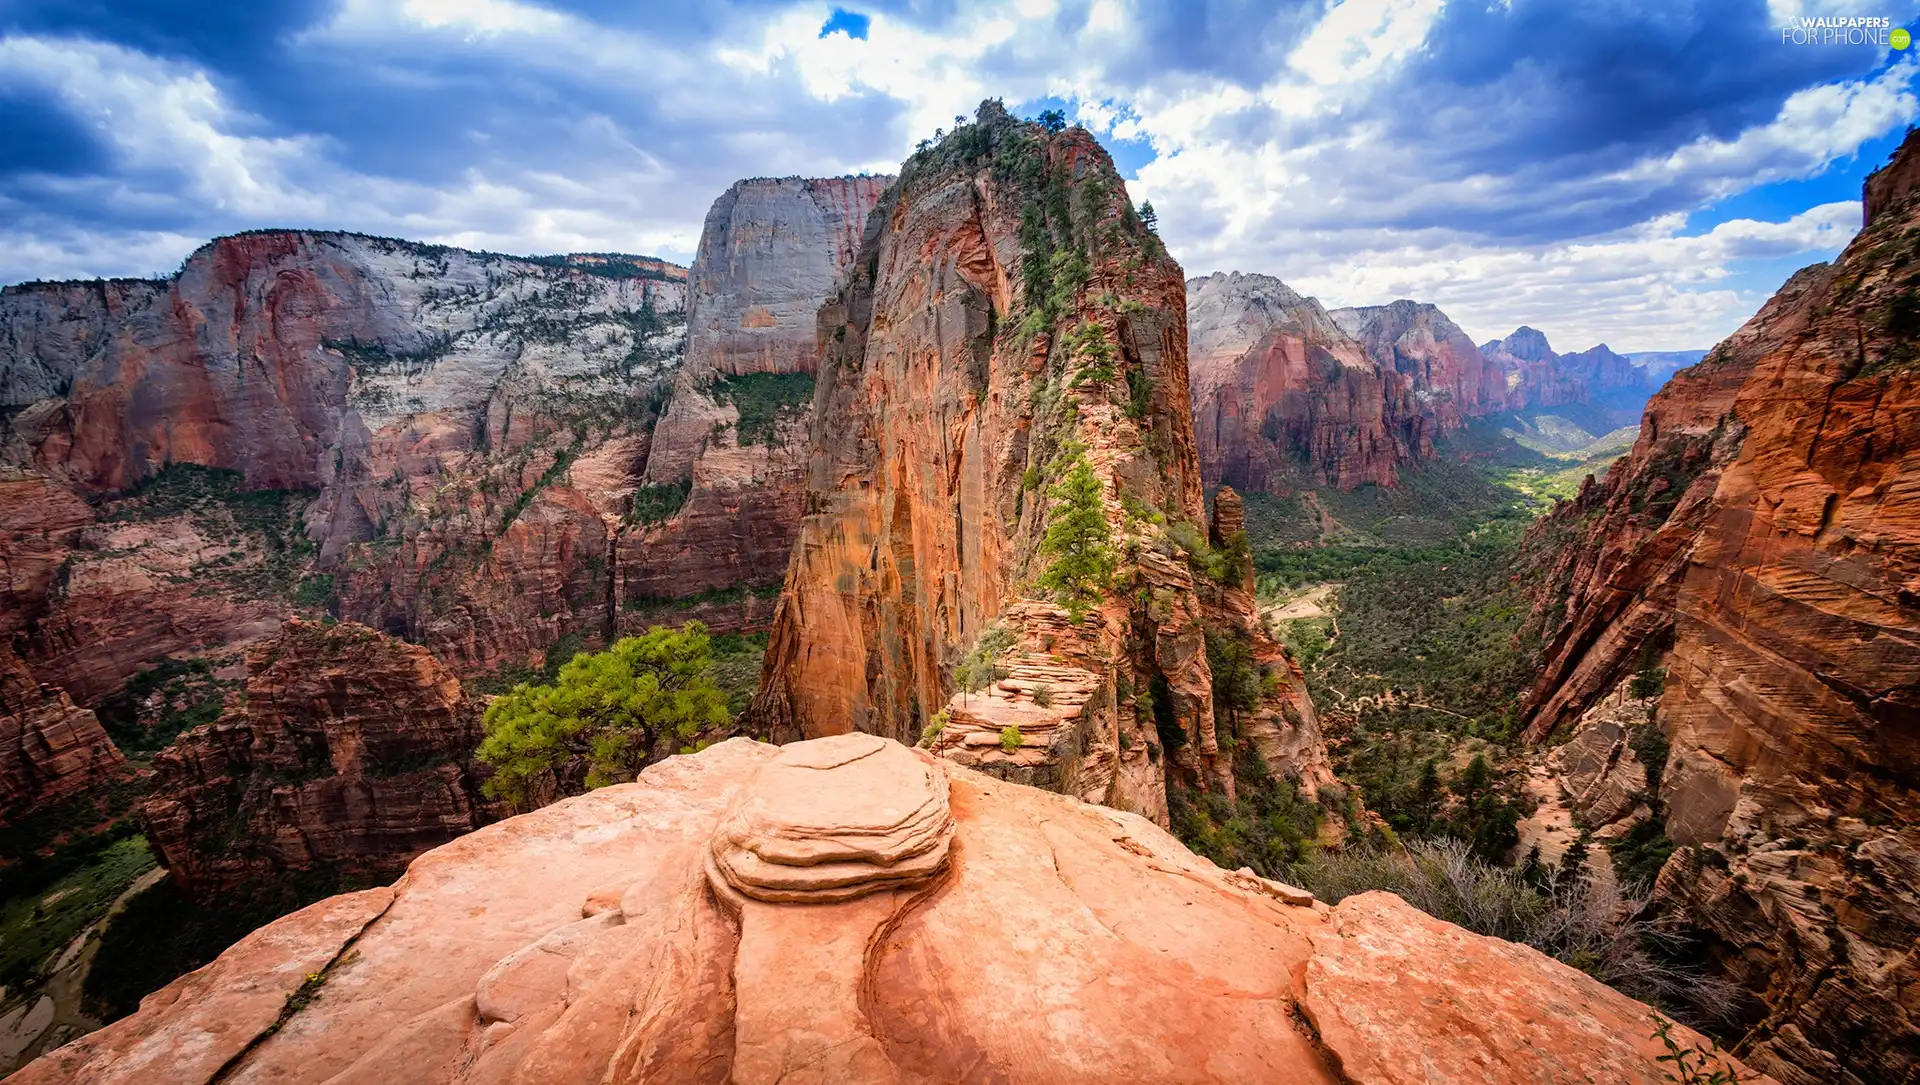 Zion National Park, The United States, canyon, rocks, Angels Landing, Utah State - For phone